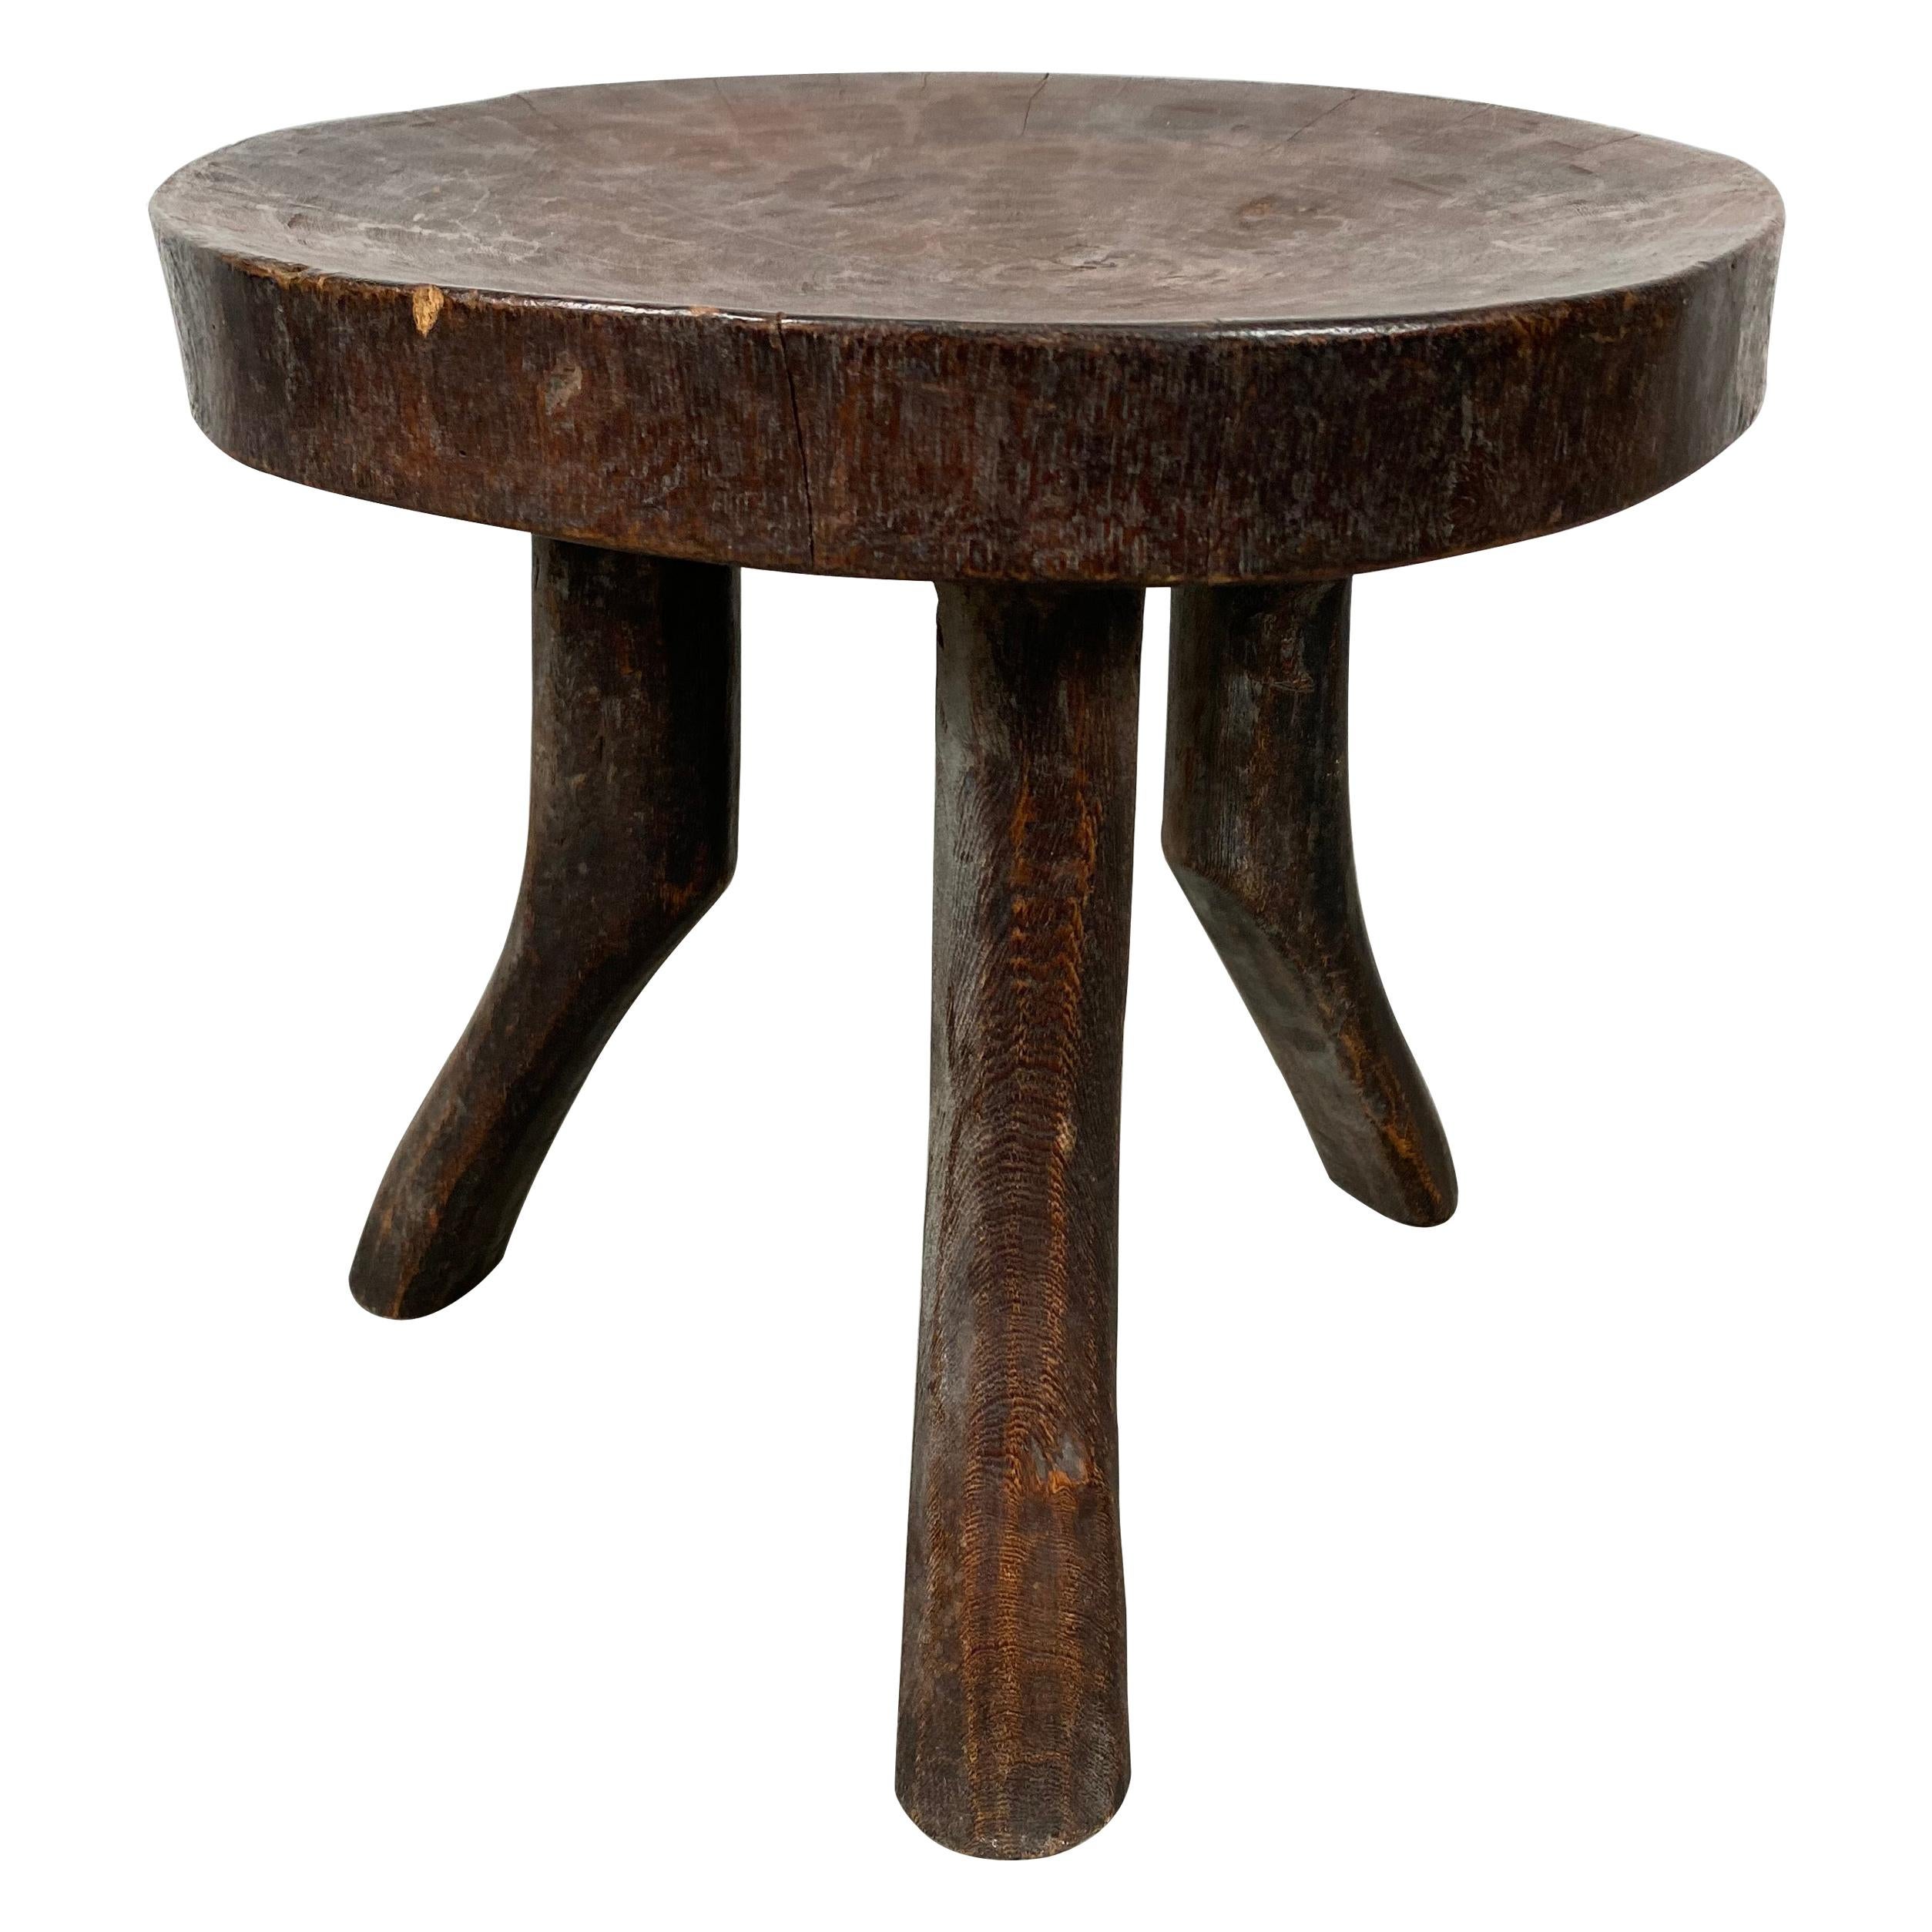 Andrianna Shamaris Antique African Mahogany Wood Stool or Side Table